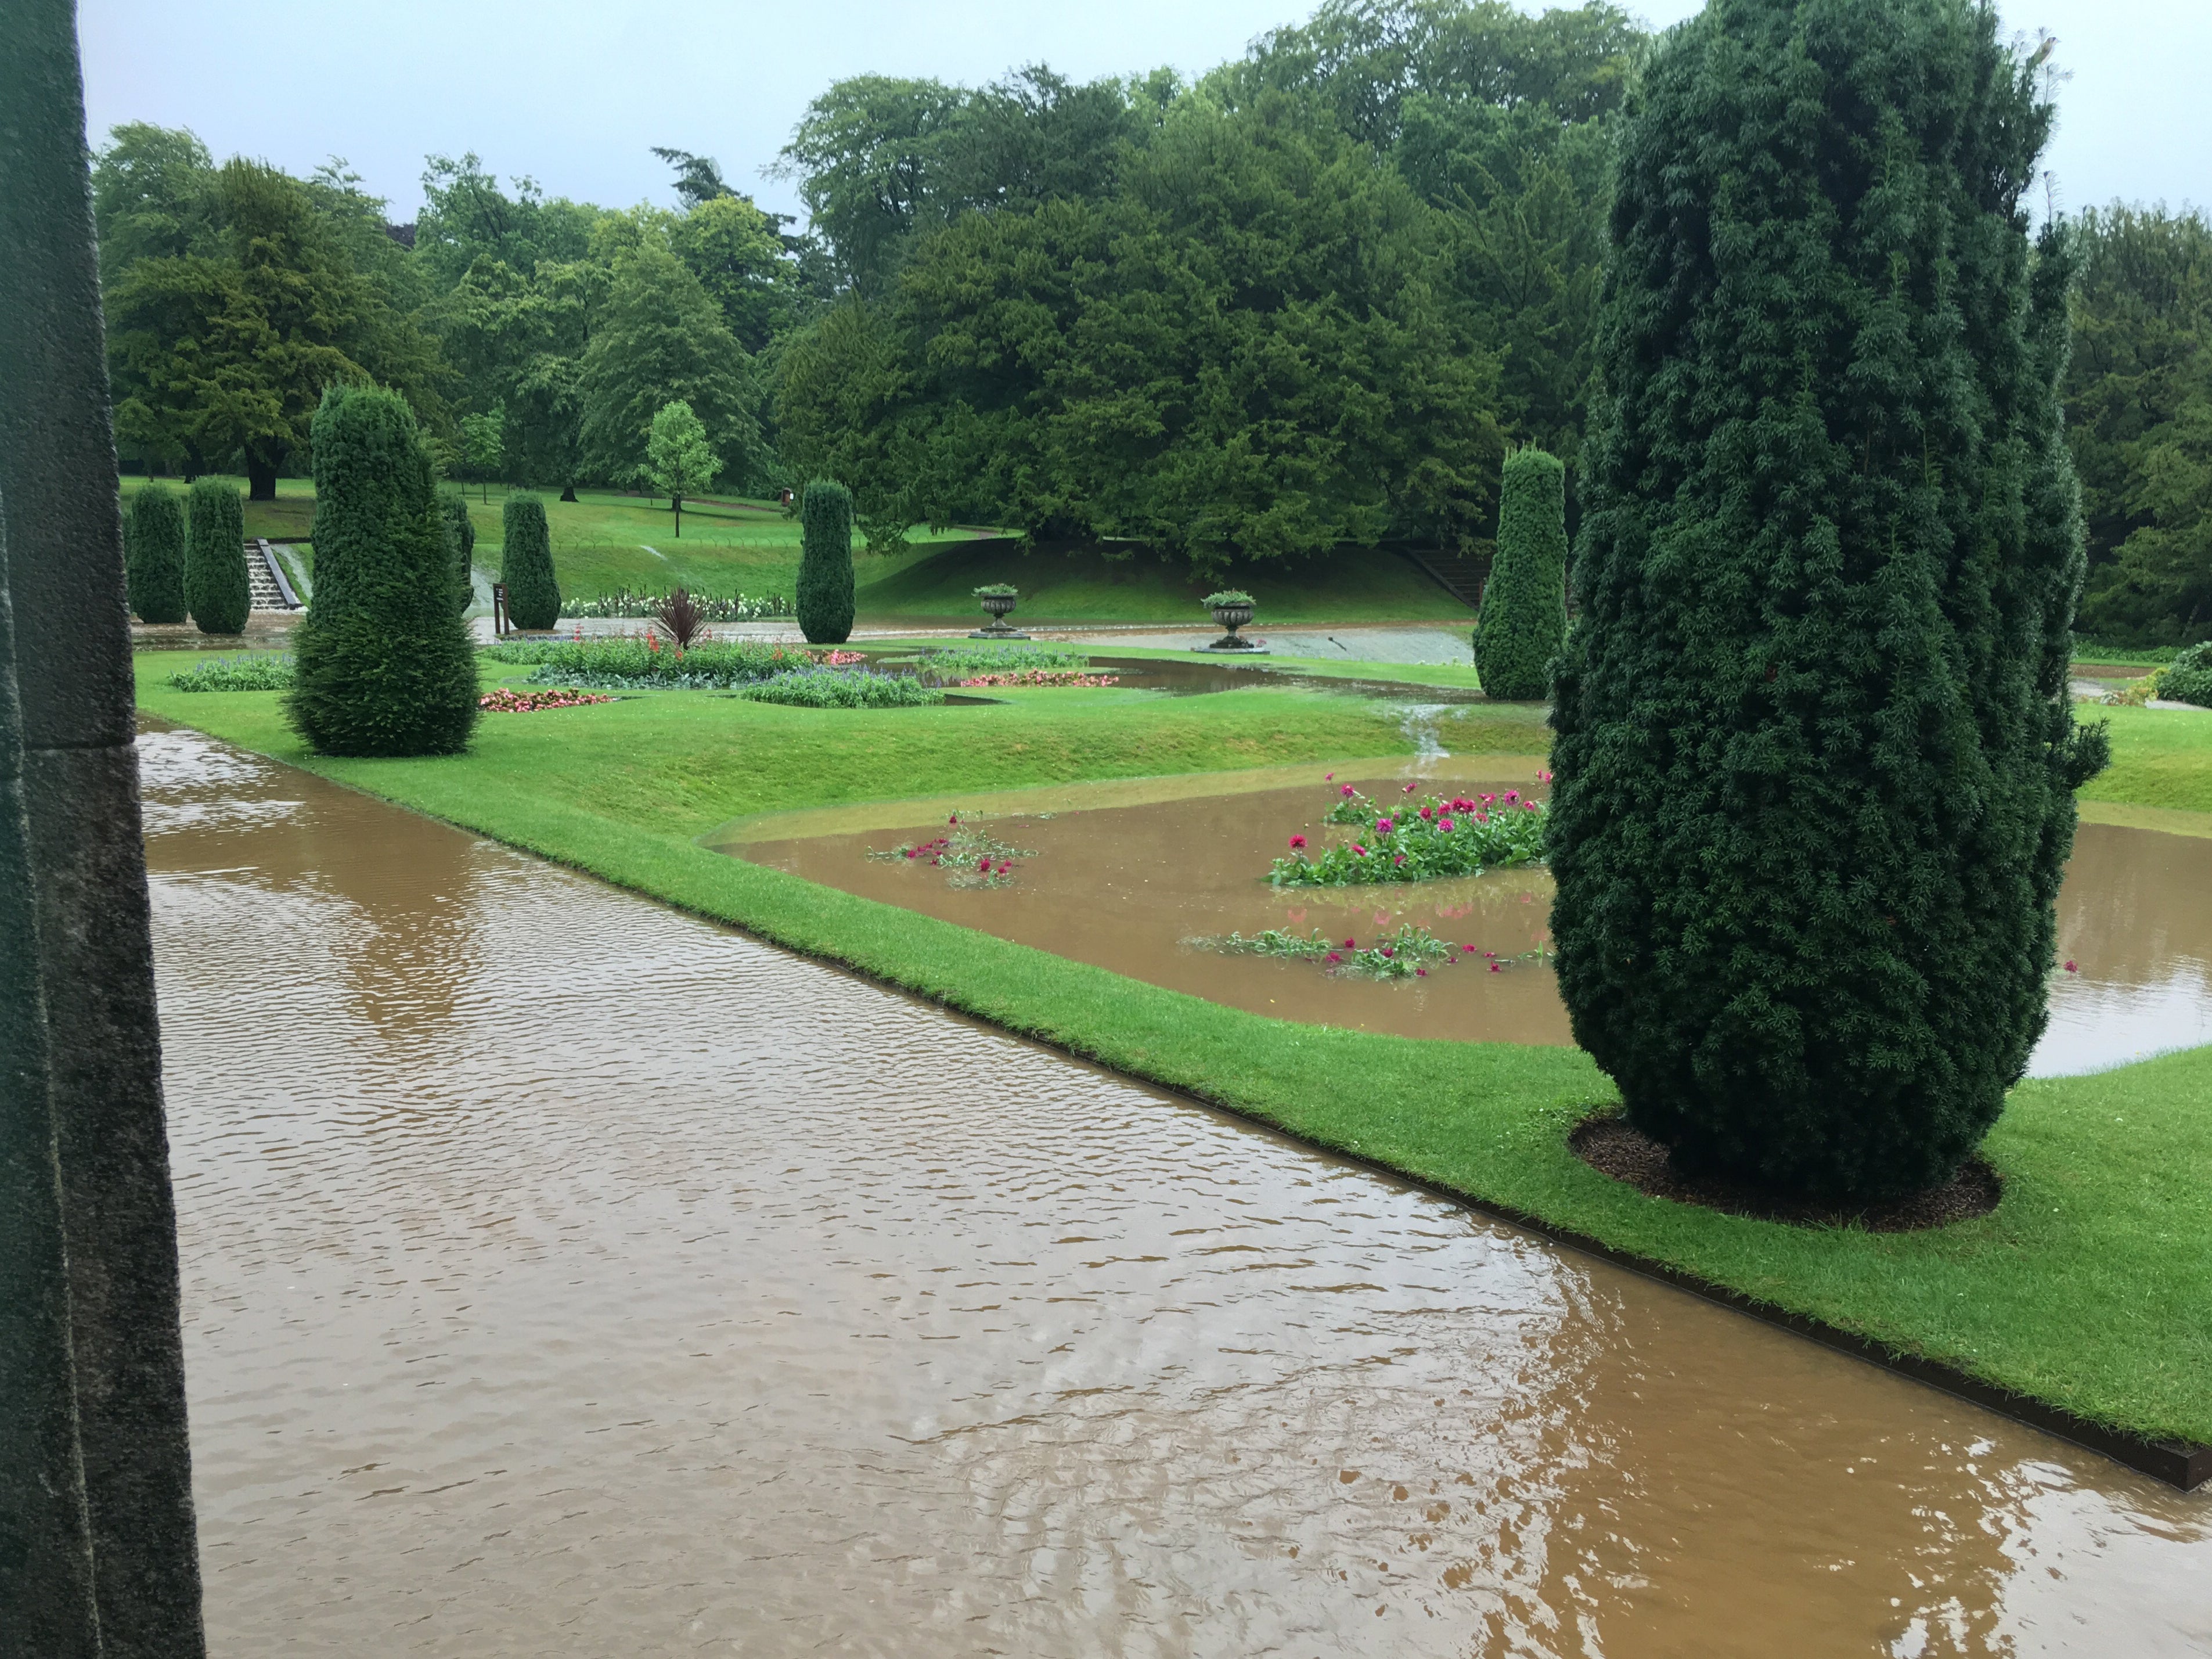 Lyme Park in Cheshire was badly flooded after heavy rain following a long dry spell in 2019